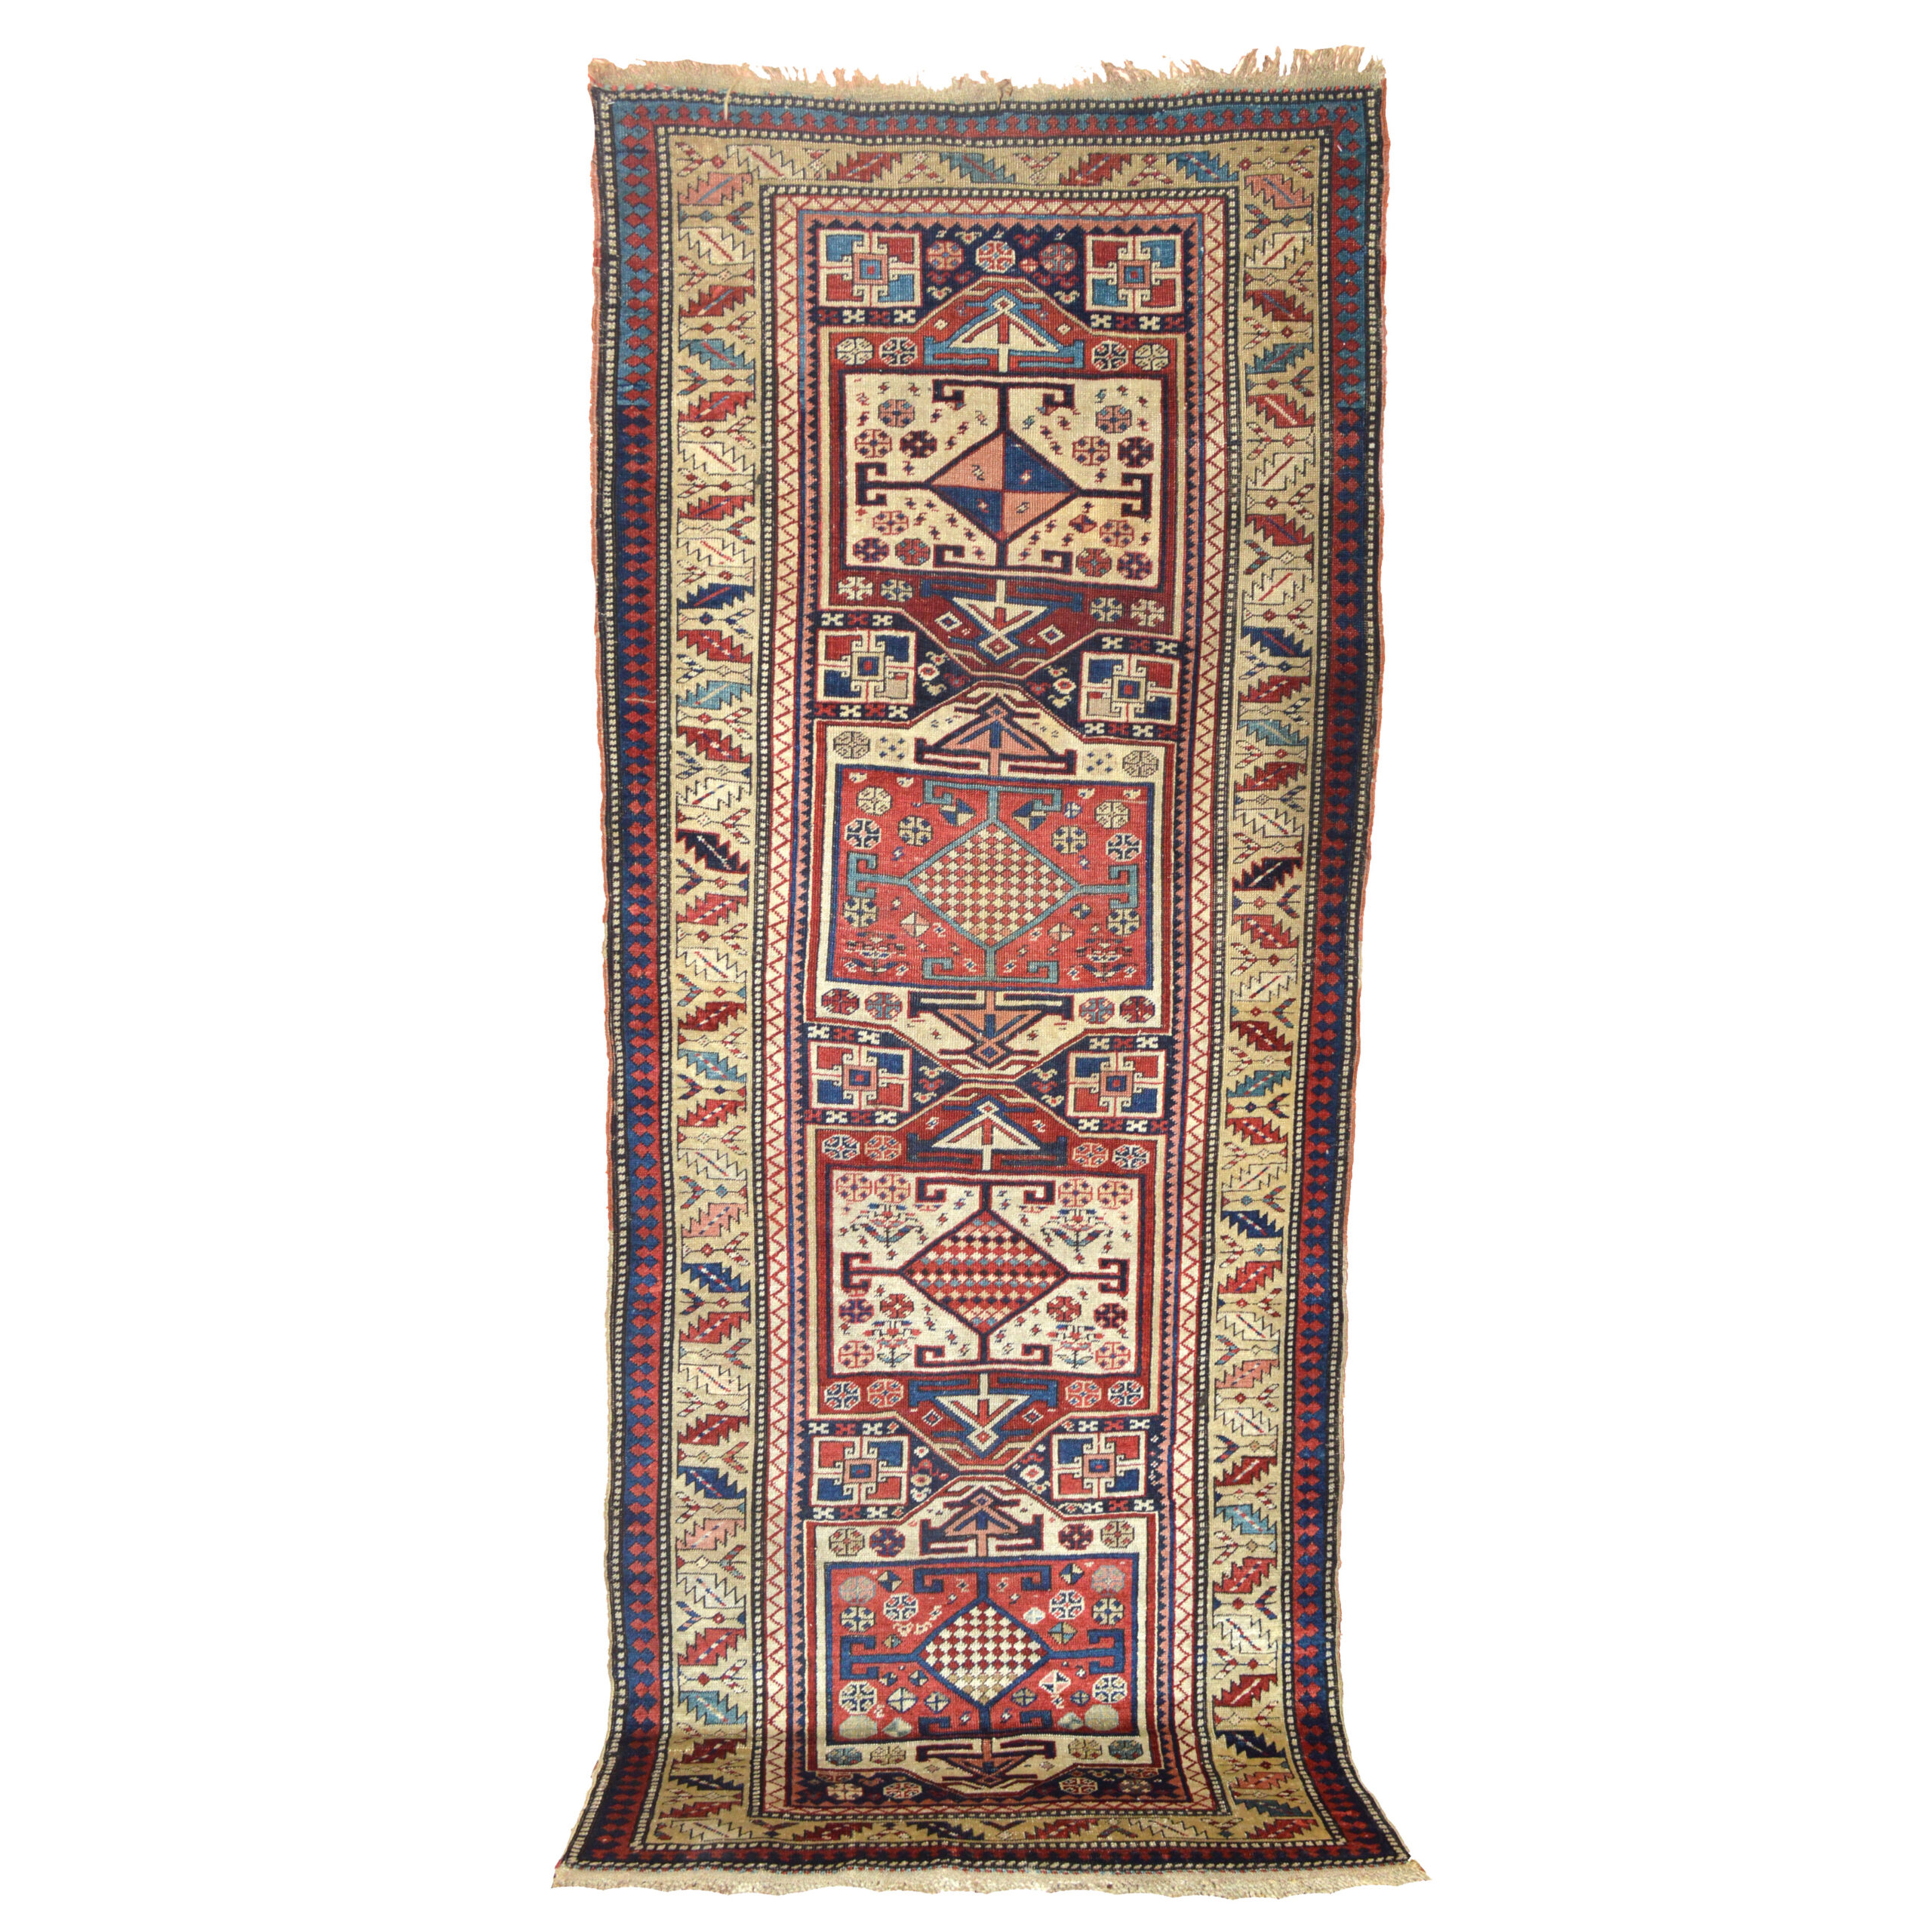 Antique Caucasian Surahni runner rug with a series of medallions framed by a light camel color border with the Leaf and Chalice design, Douglas Stock Gallery, antique Oriental rugs, antique Caucasian rugs, antique runners Boston,MA area